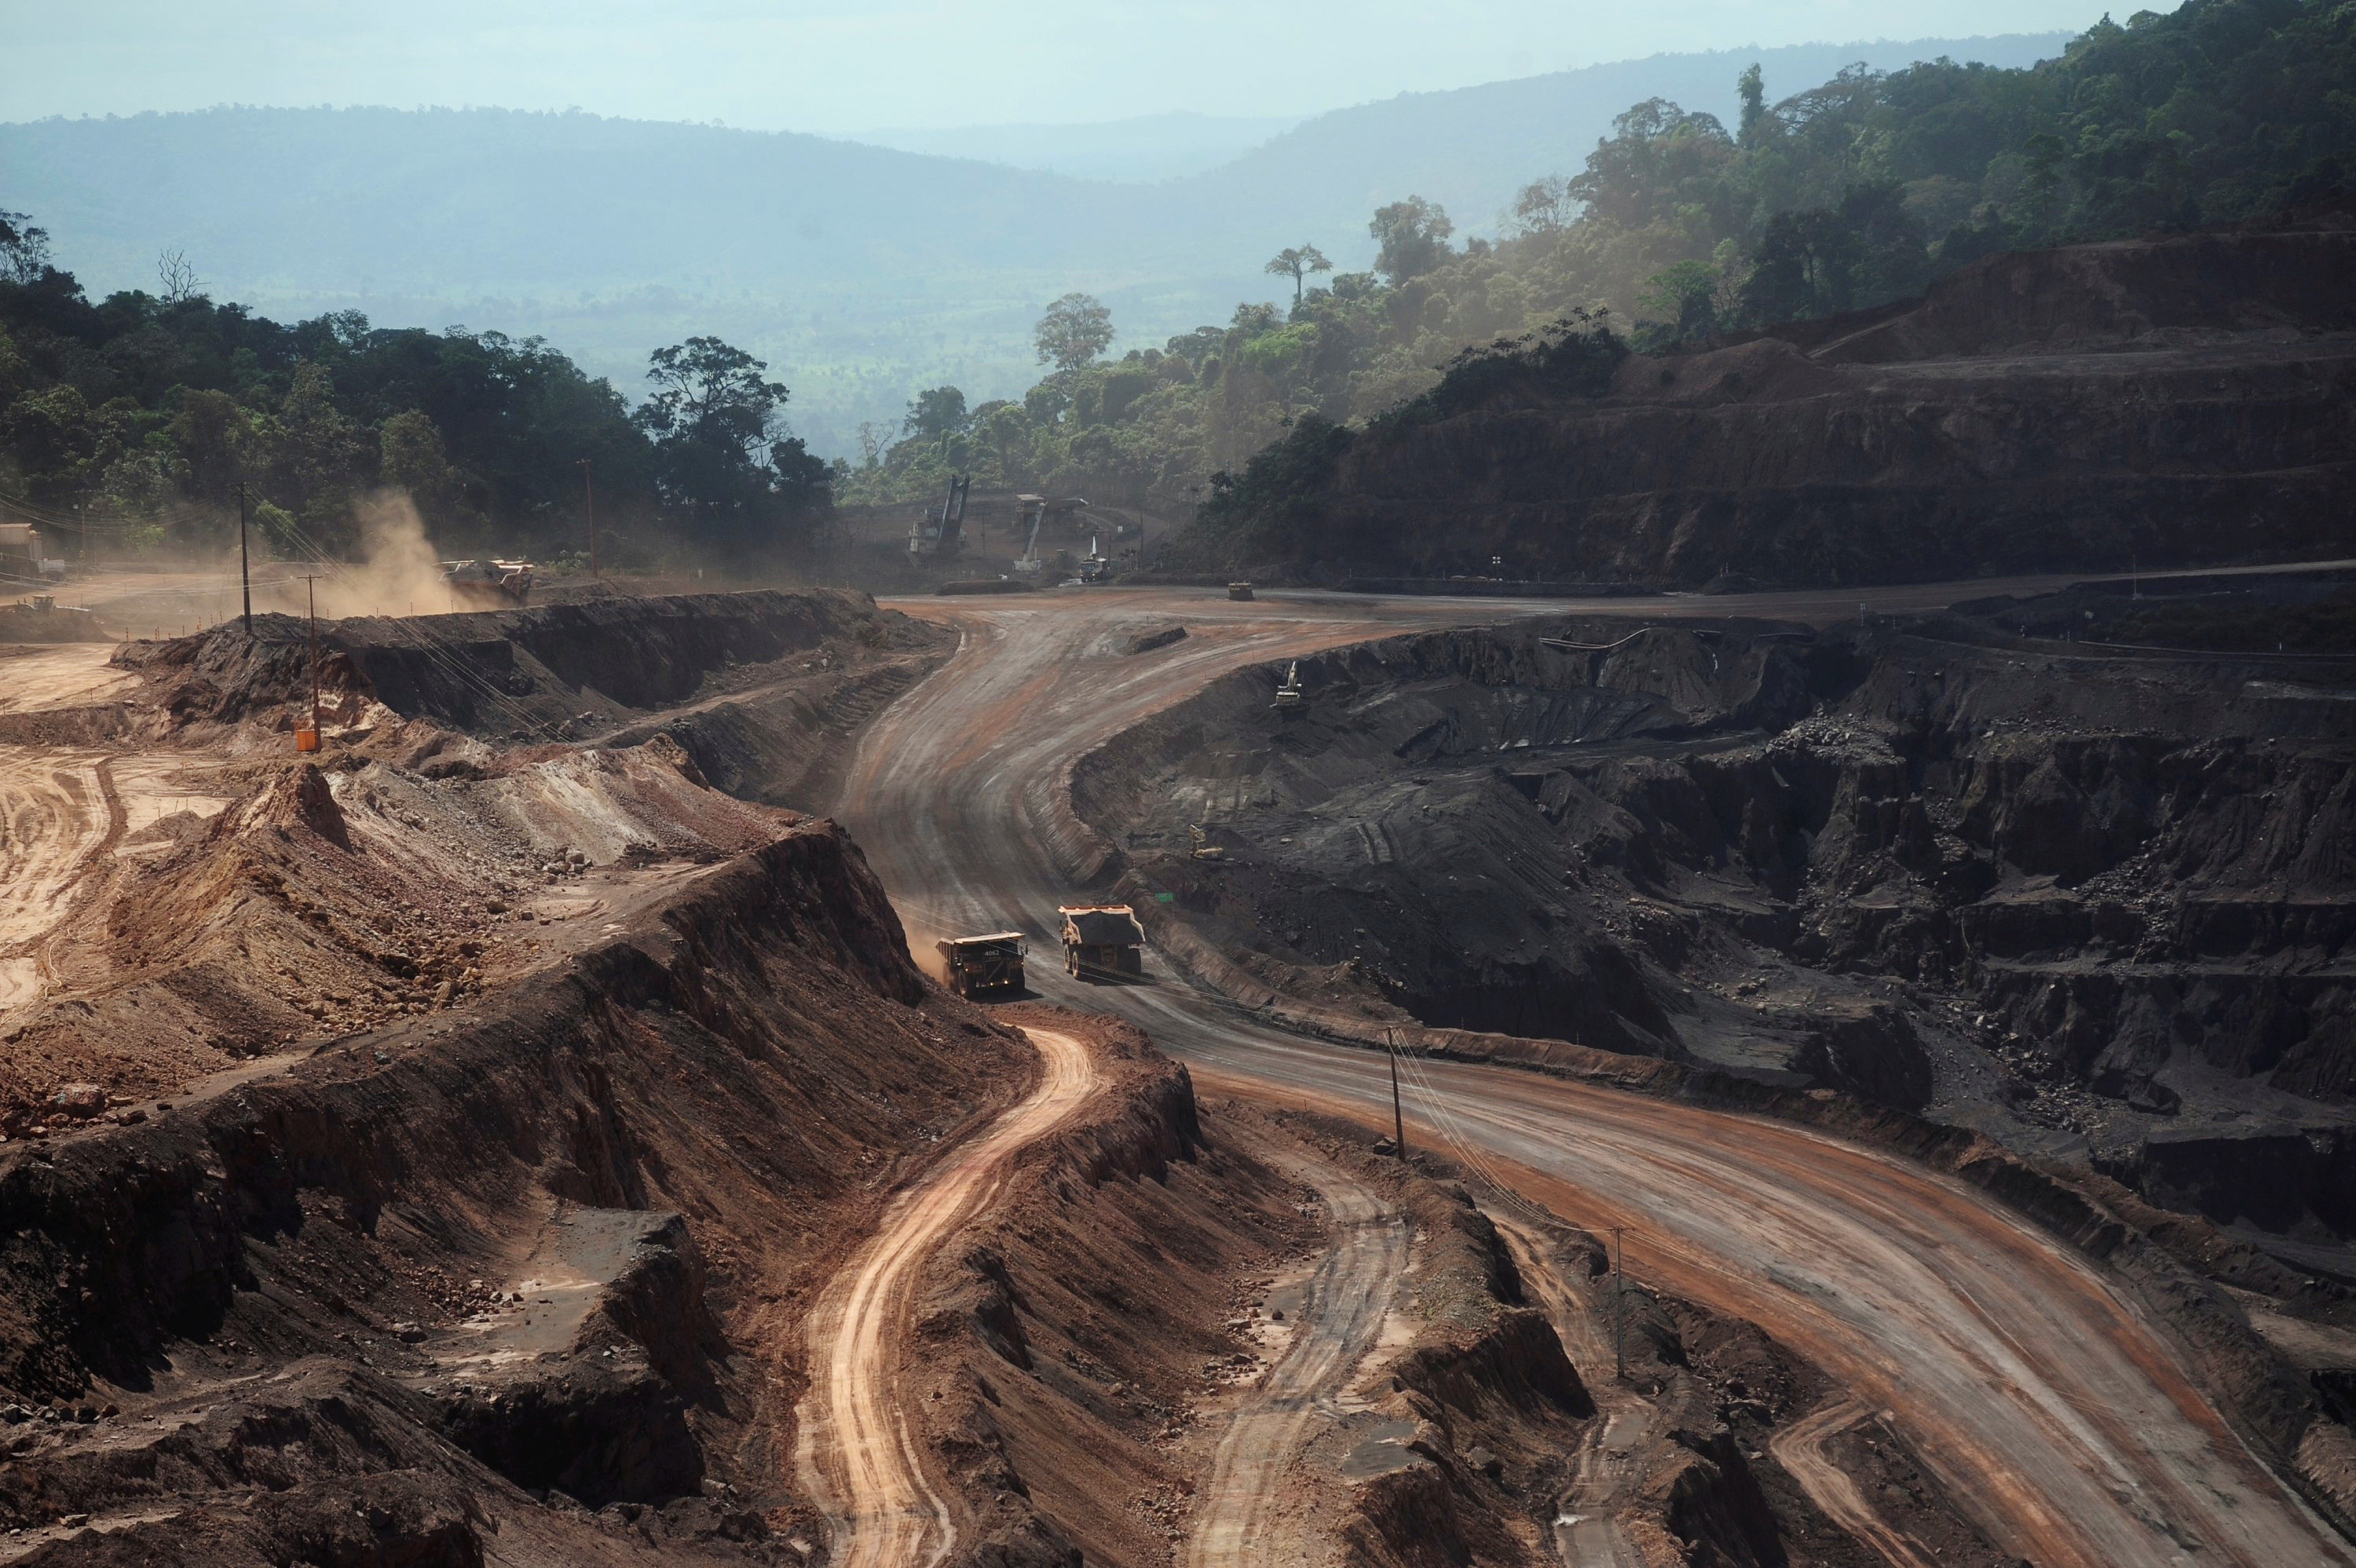 Vale's Ferro Carajas iron ore mine in the Carajas National Forest in Parauapebas as seen in 2012